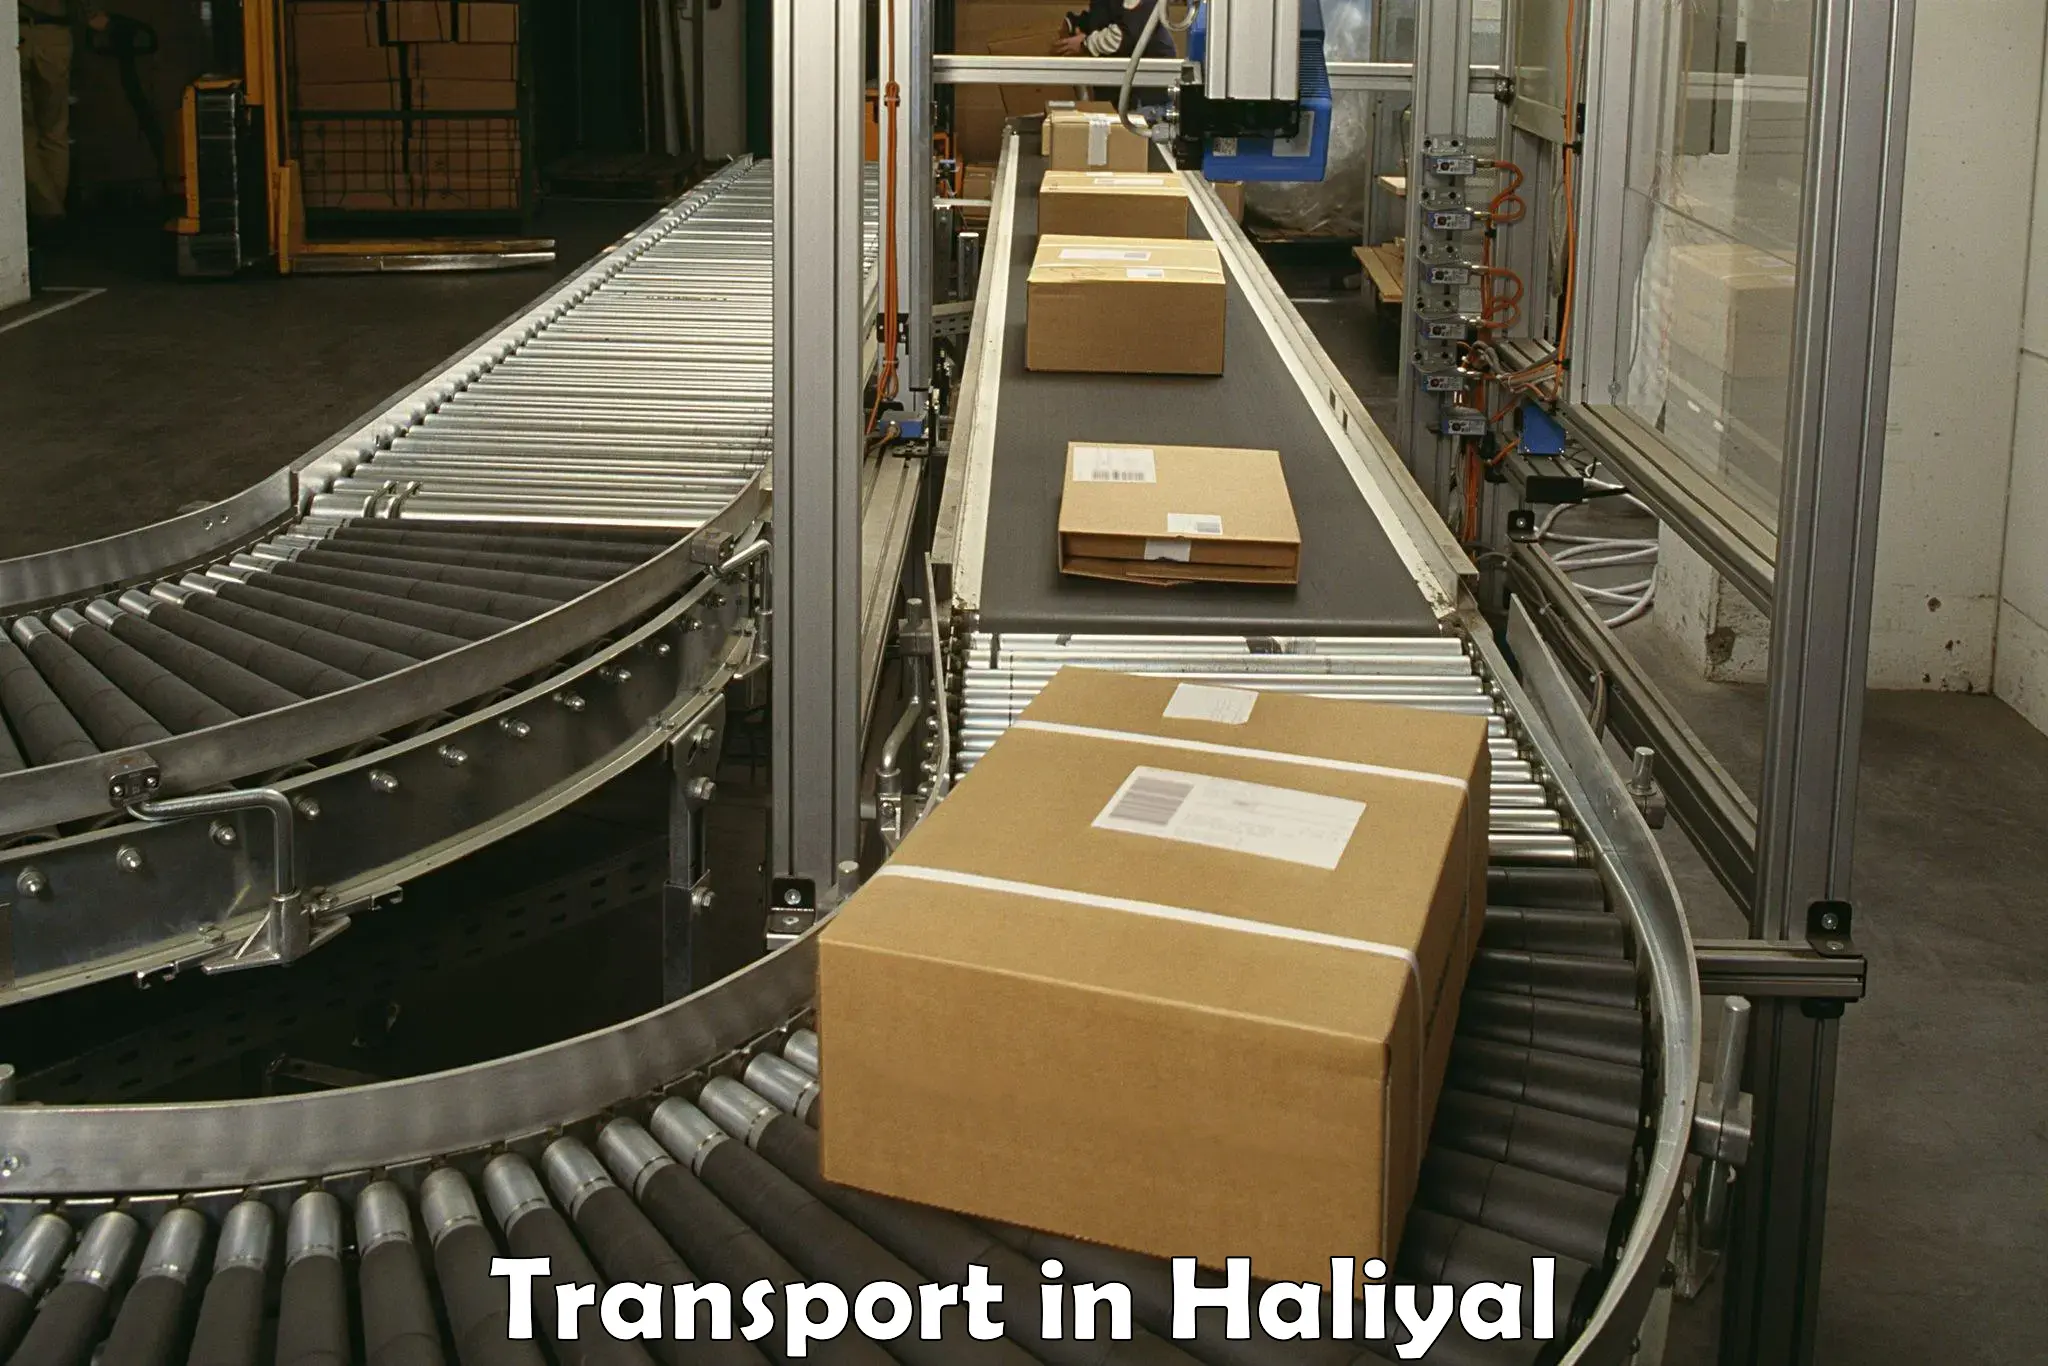 Container transport service in Haliyal